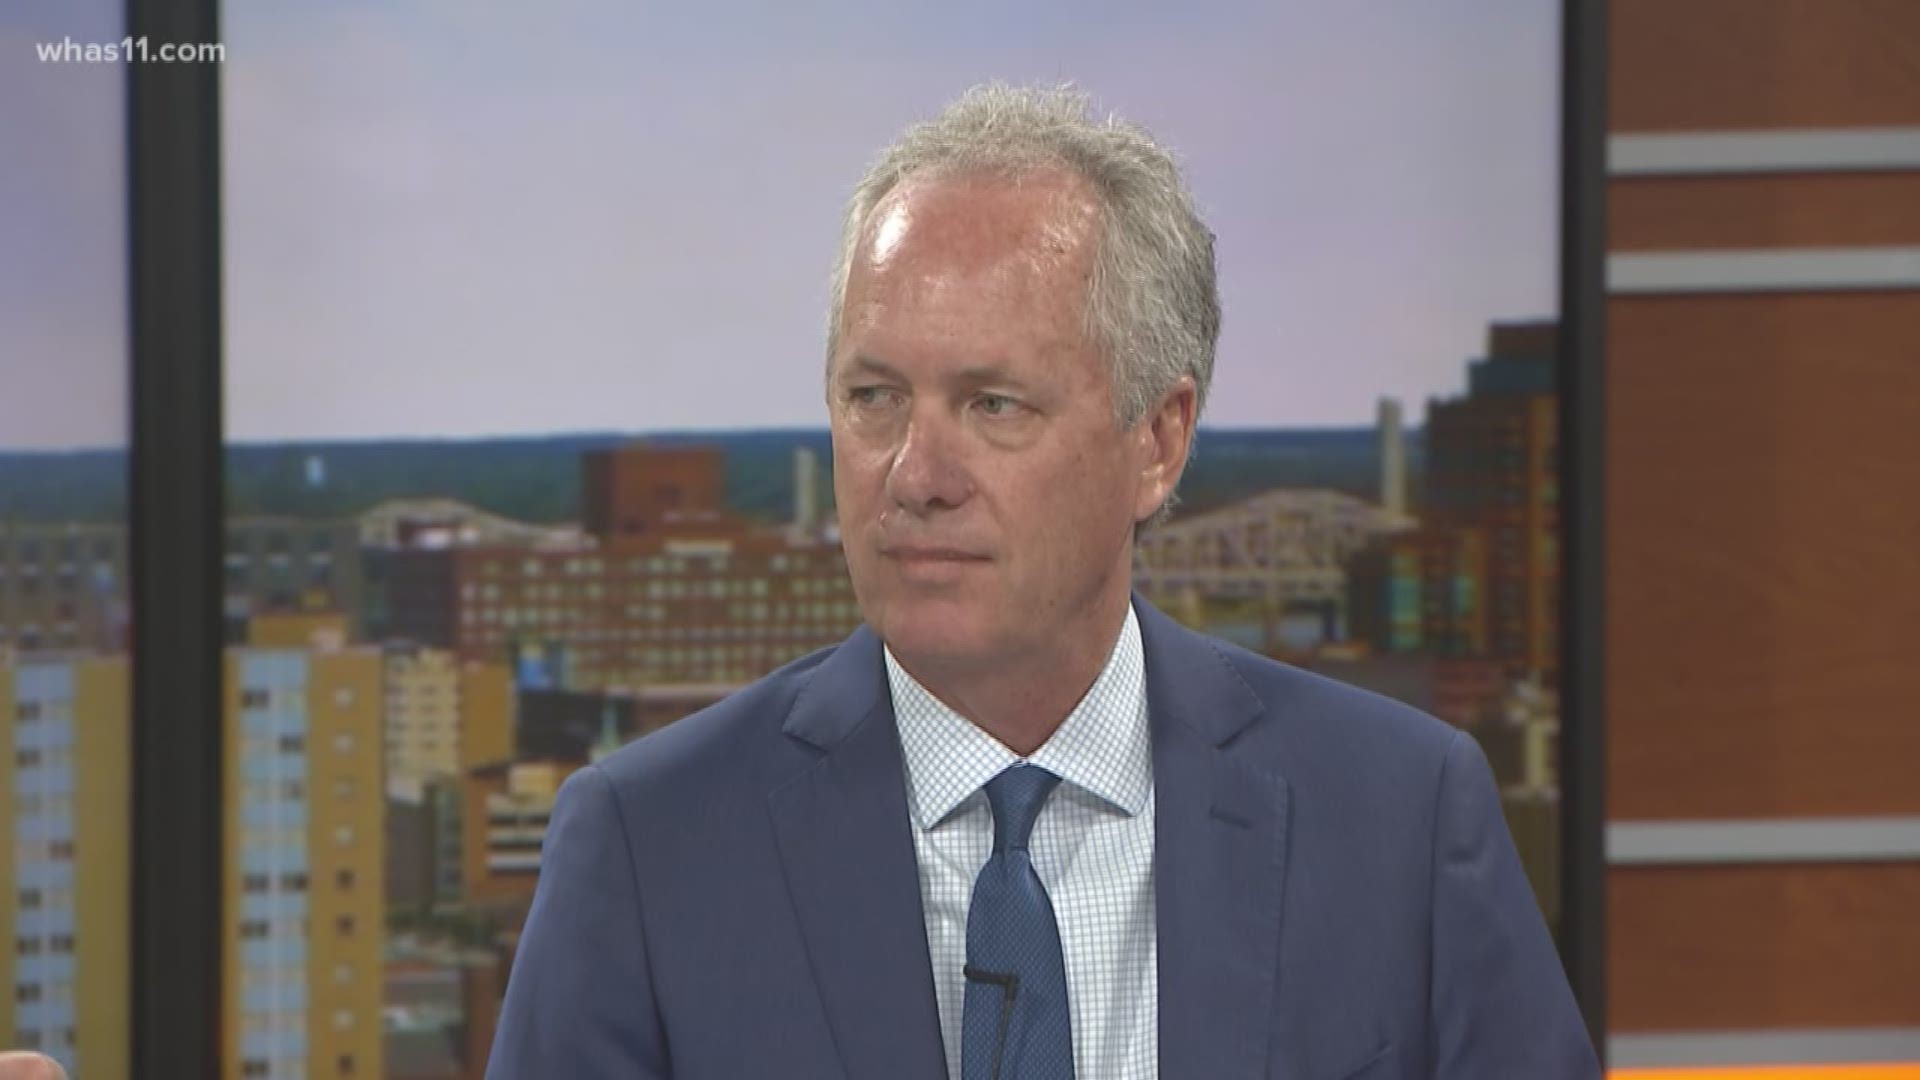 Greg Fischer sits down with WHAS11 to discuss his reaction to Governor Matt Bevin tweeting that the city deserves better, and explains the importance of The Big Table on September 15.